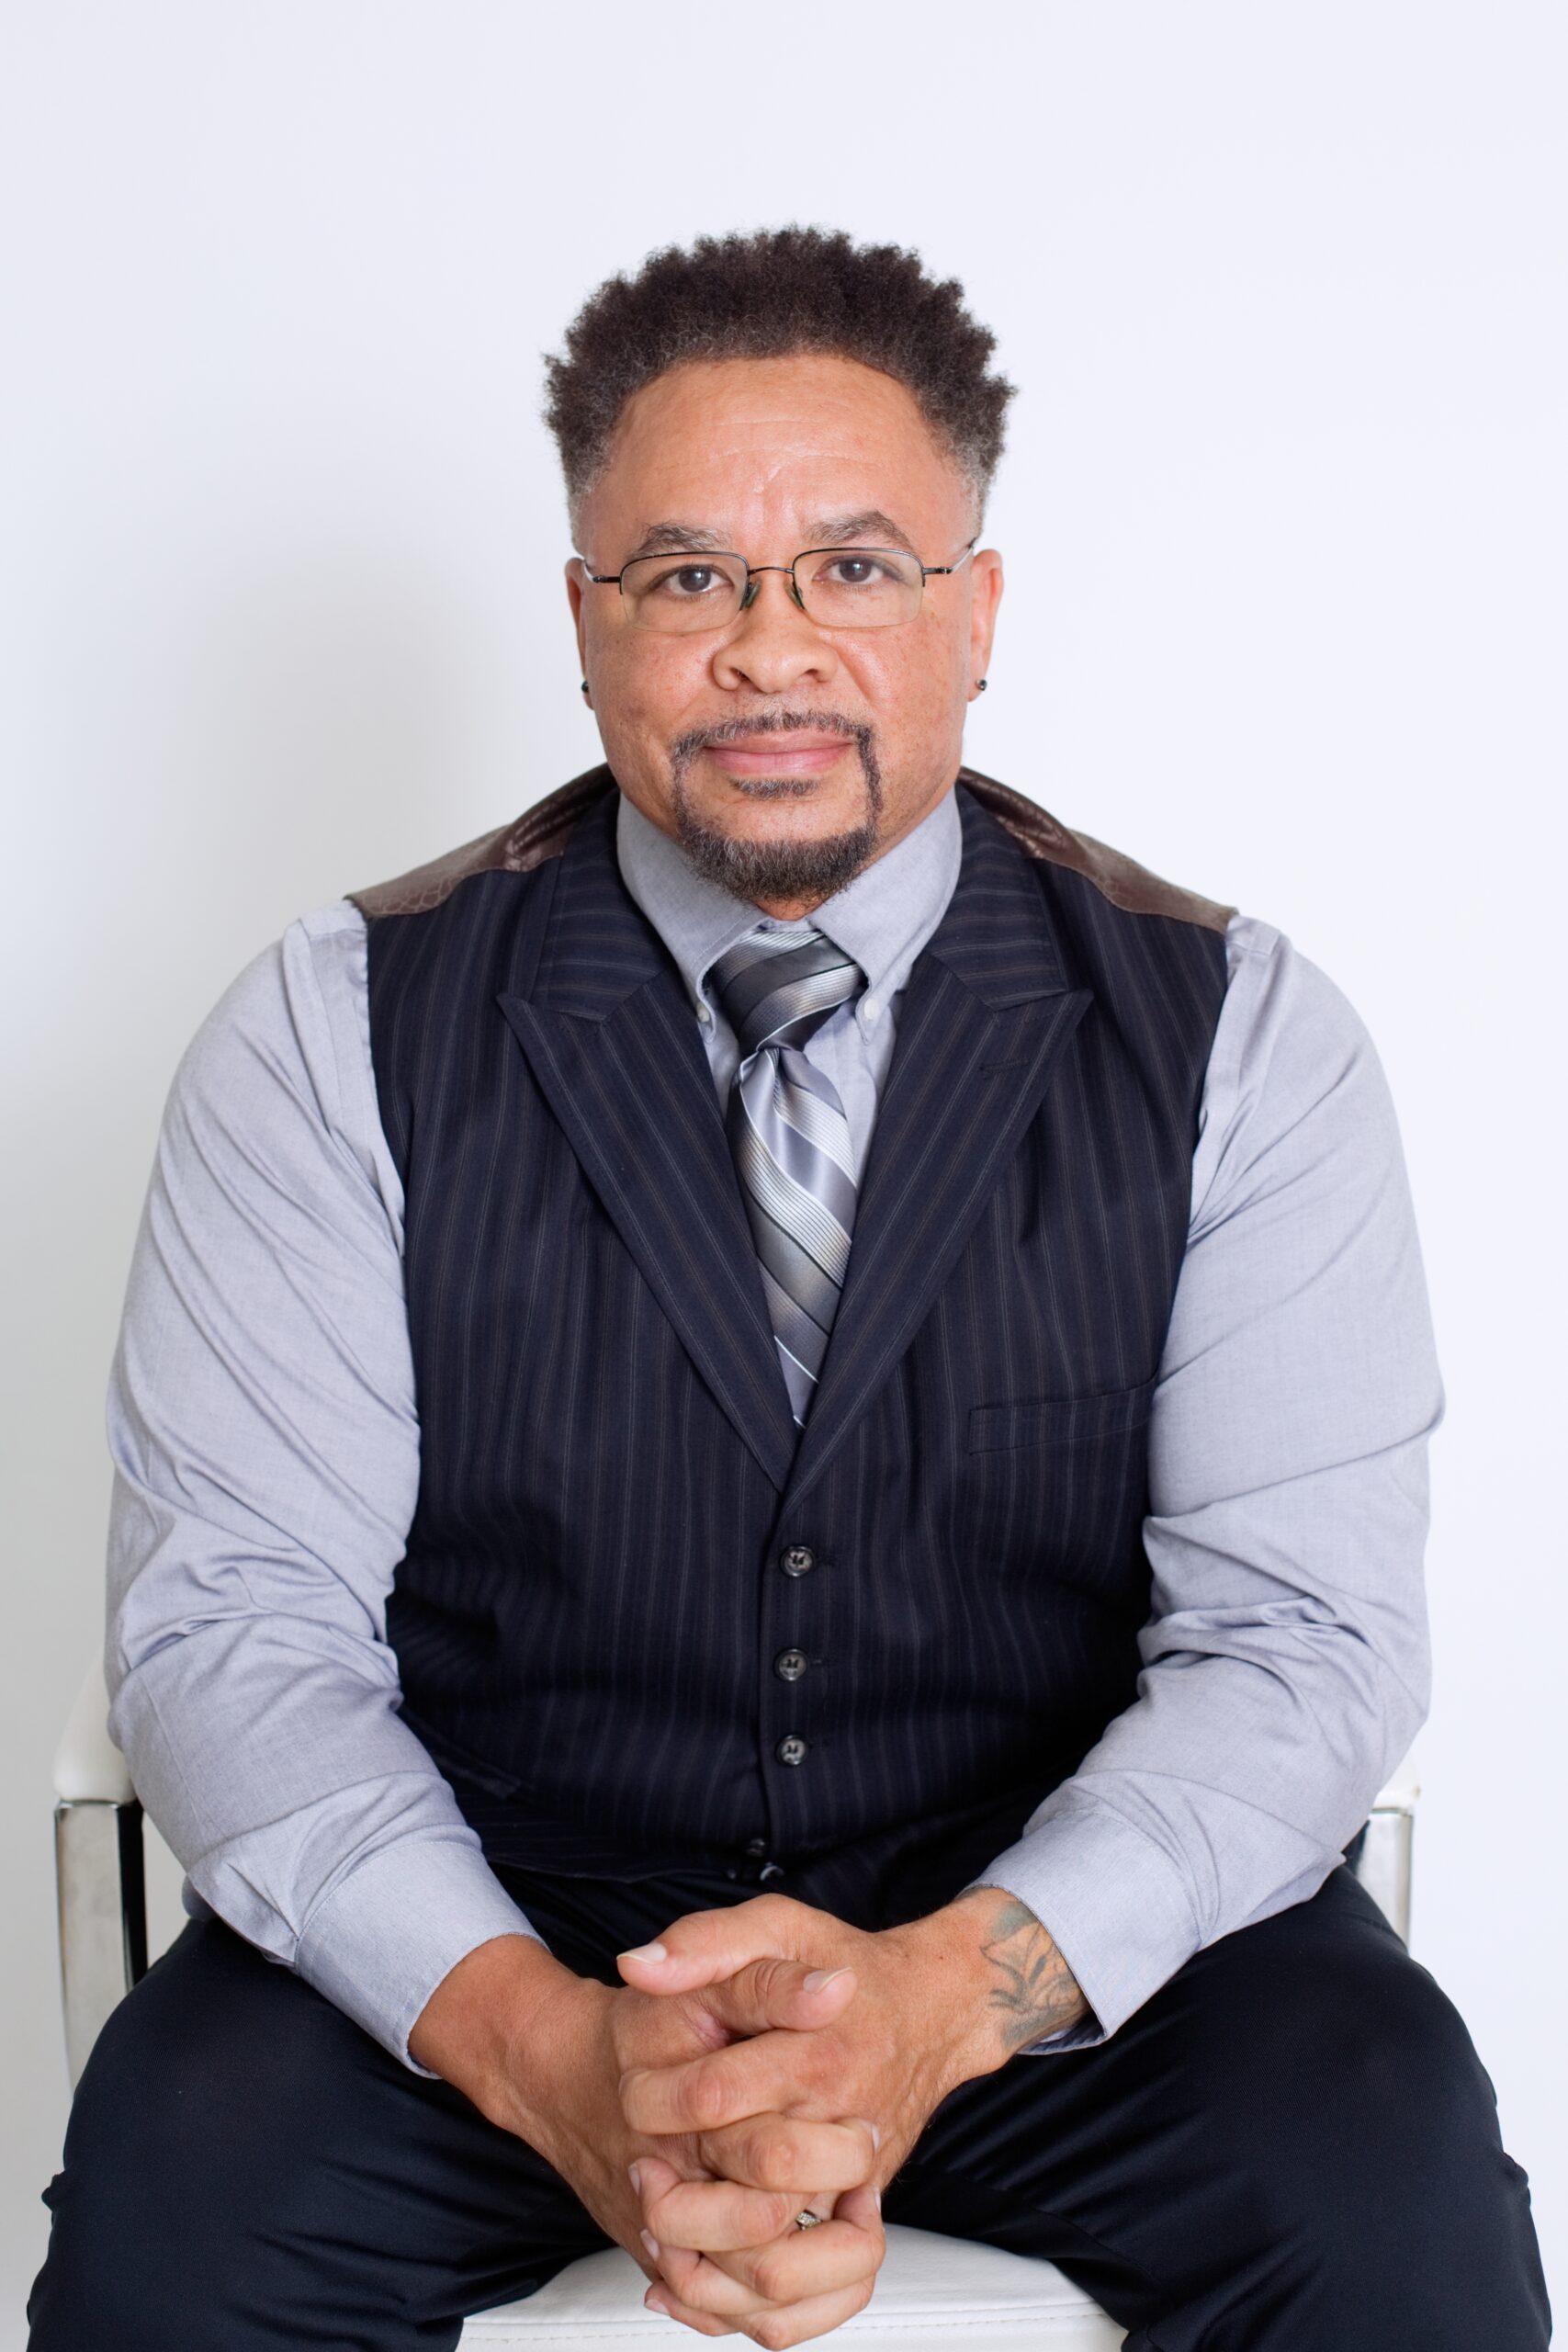 Business man with glasses sitting on chair posing in business attire